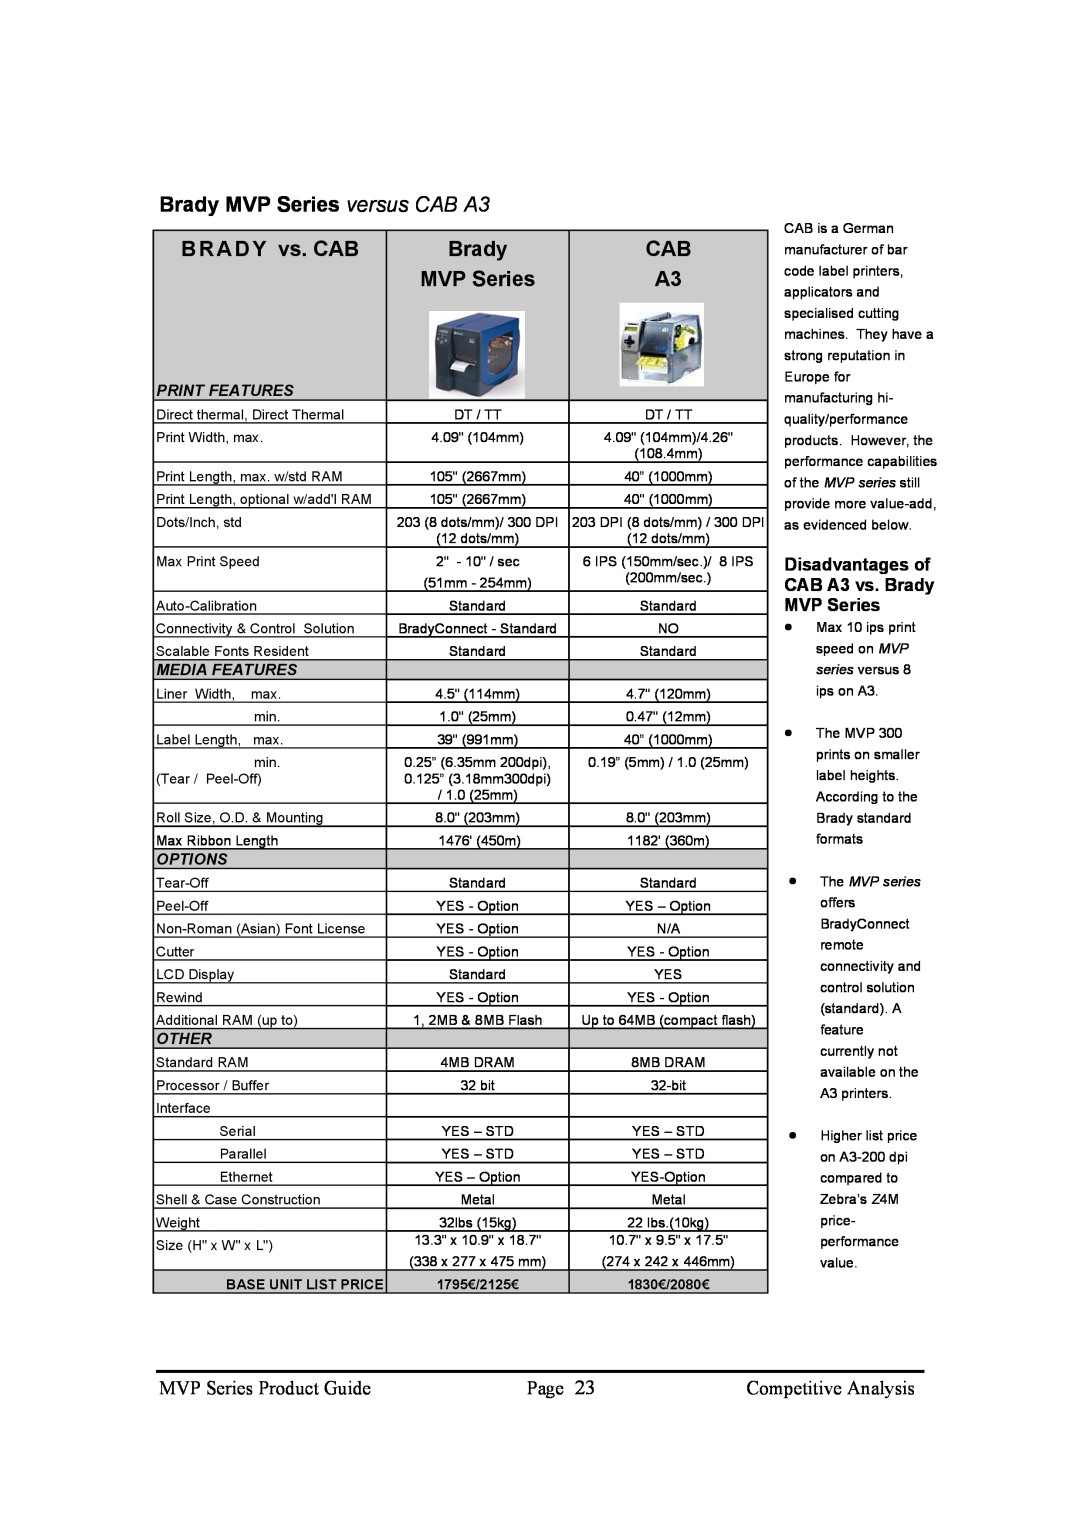 Brady 300MVP MVP Series Product Guide, Page, Competitive Analysis, Disadvantages of CAB A3 vs. Brady MVP Series, Options 